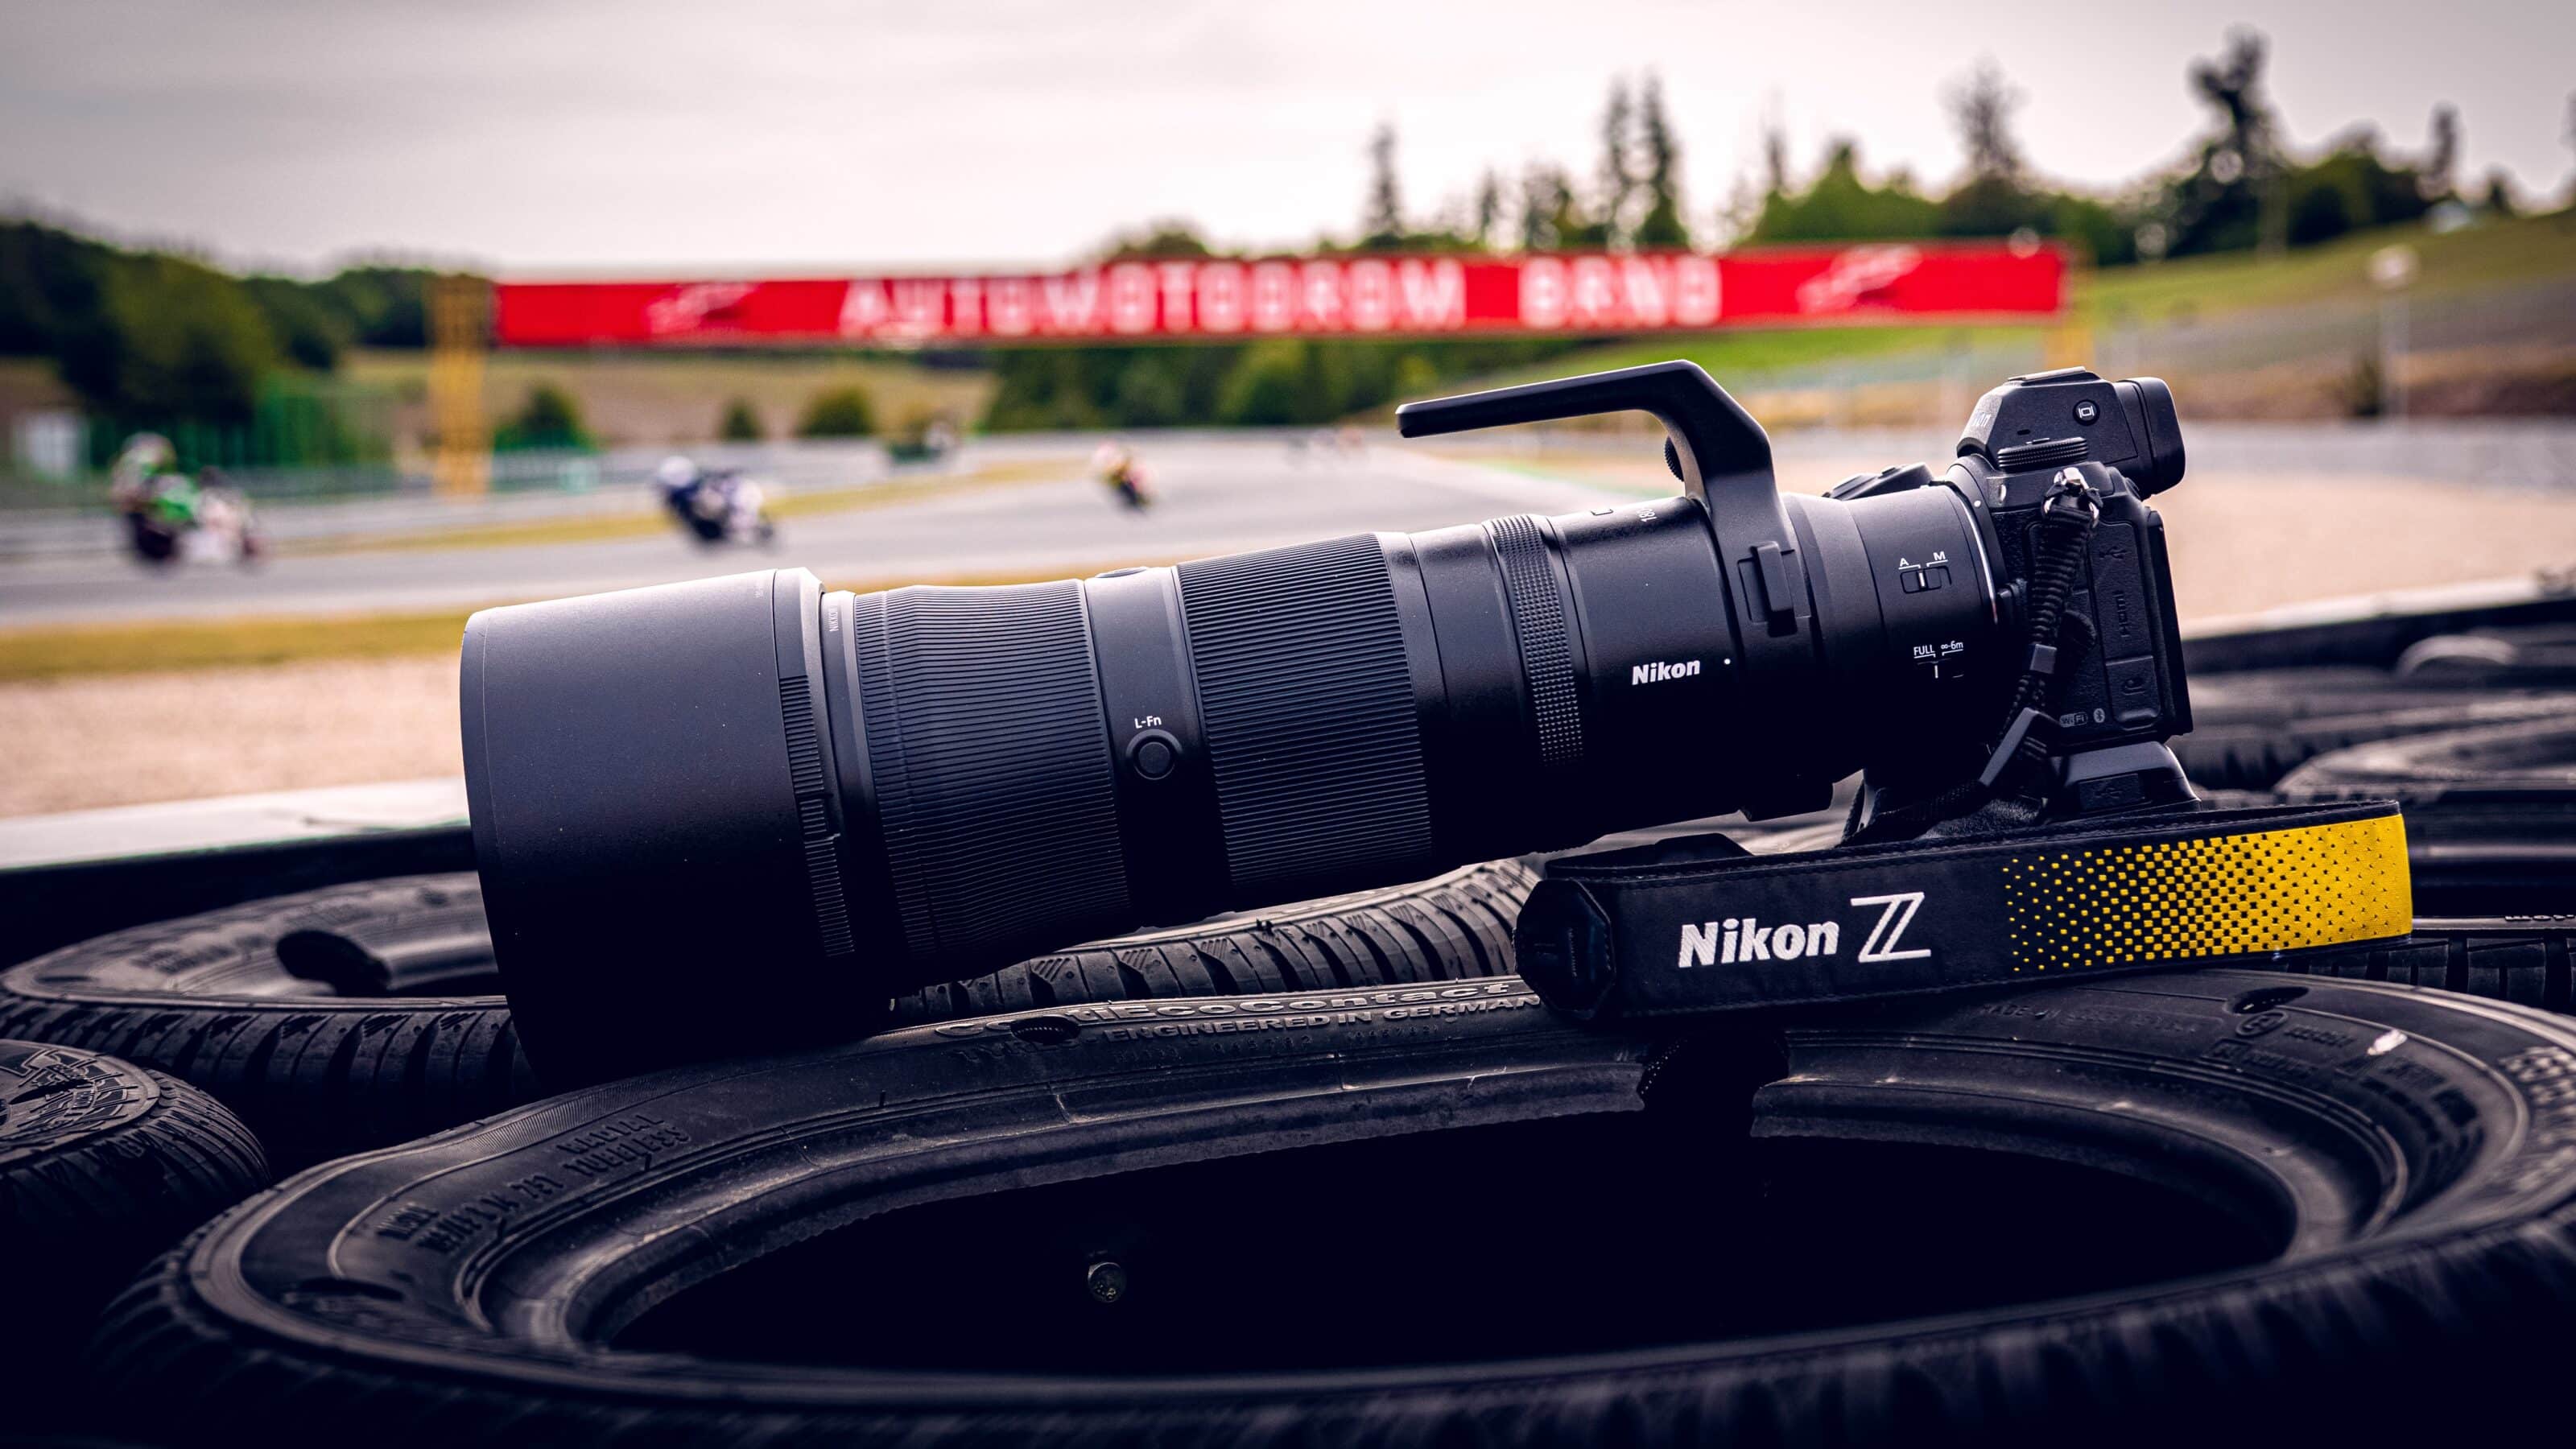 The Nikkor Z 180-600mm Telephoto Lens A Versatile Lens at an Affordable Price